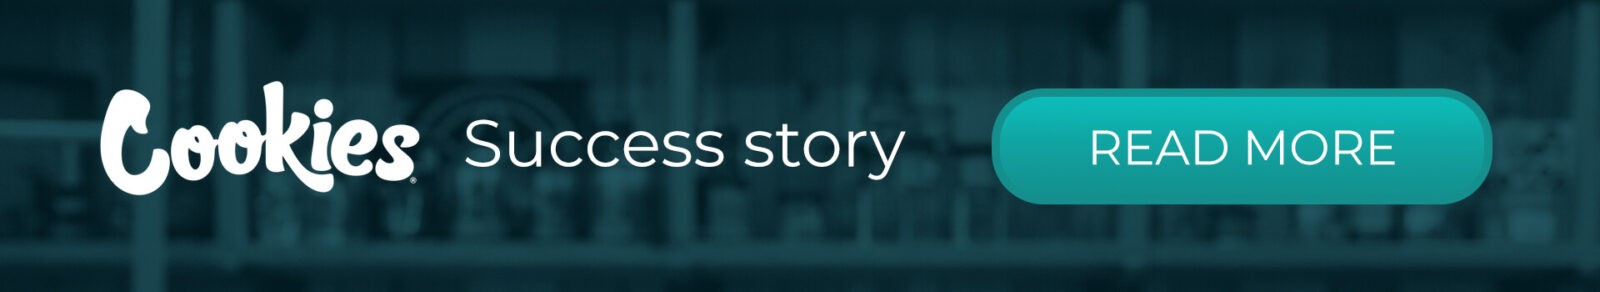 cookies-success-story-banner